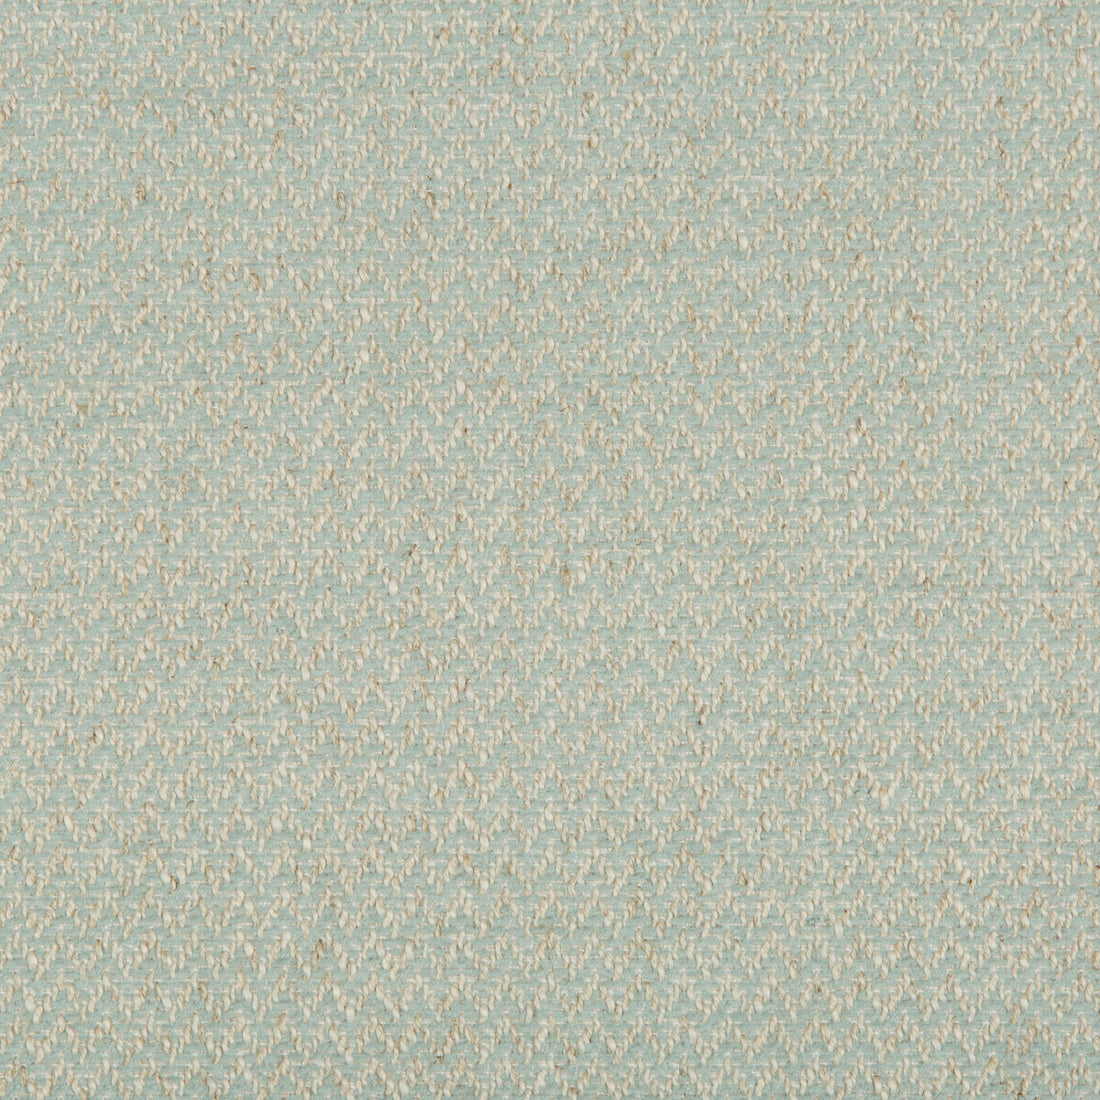 Kravet Contract fabric in 35408-23 color - pattern 35408.23.0 - by Kravet Contract in the Crypton Incase collection